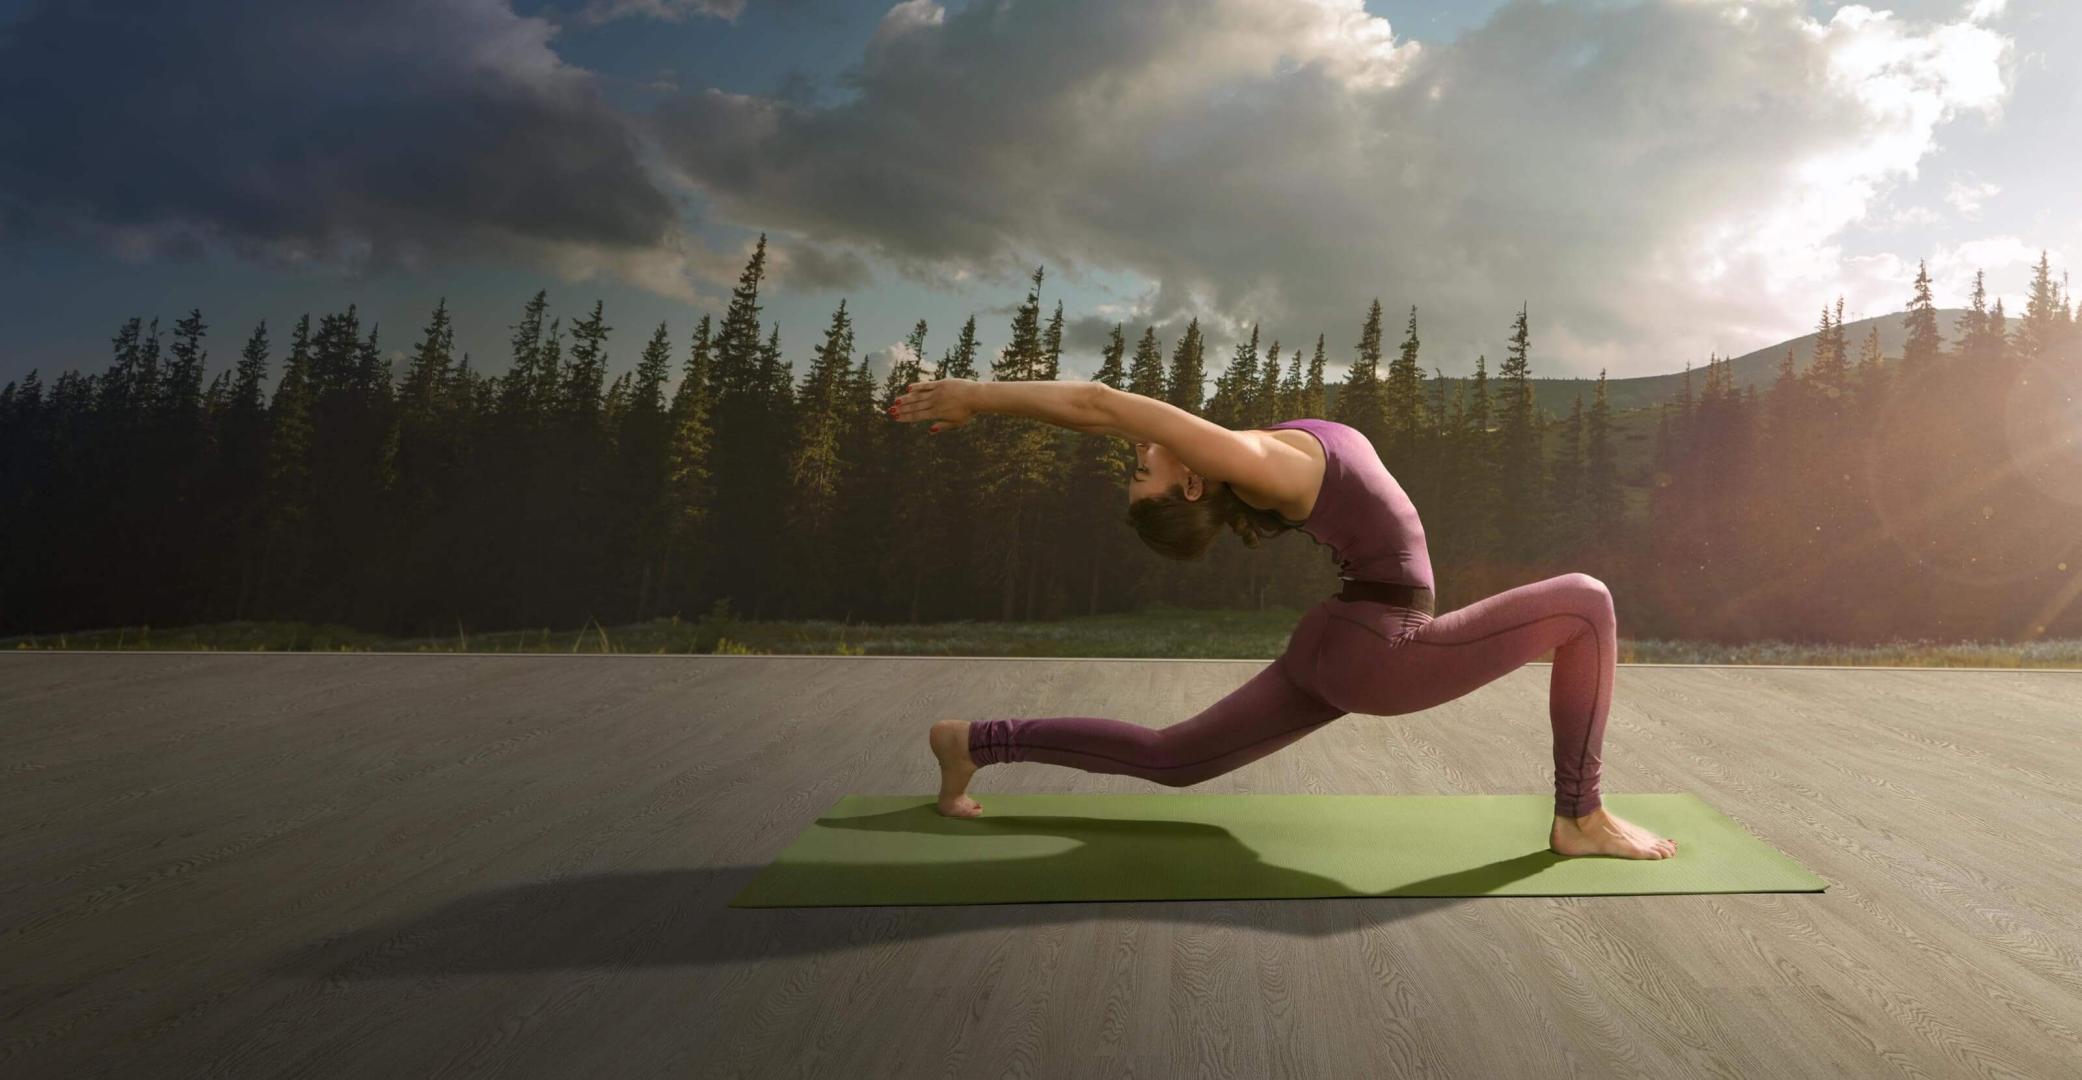 Woman practicing a yoga pose on a green mat outdoors, with a serene forest and mountain landscape in the background.